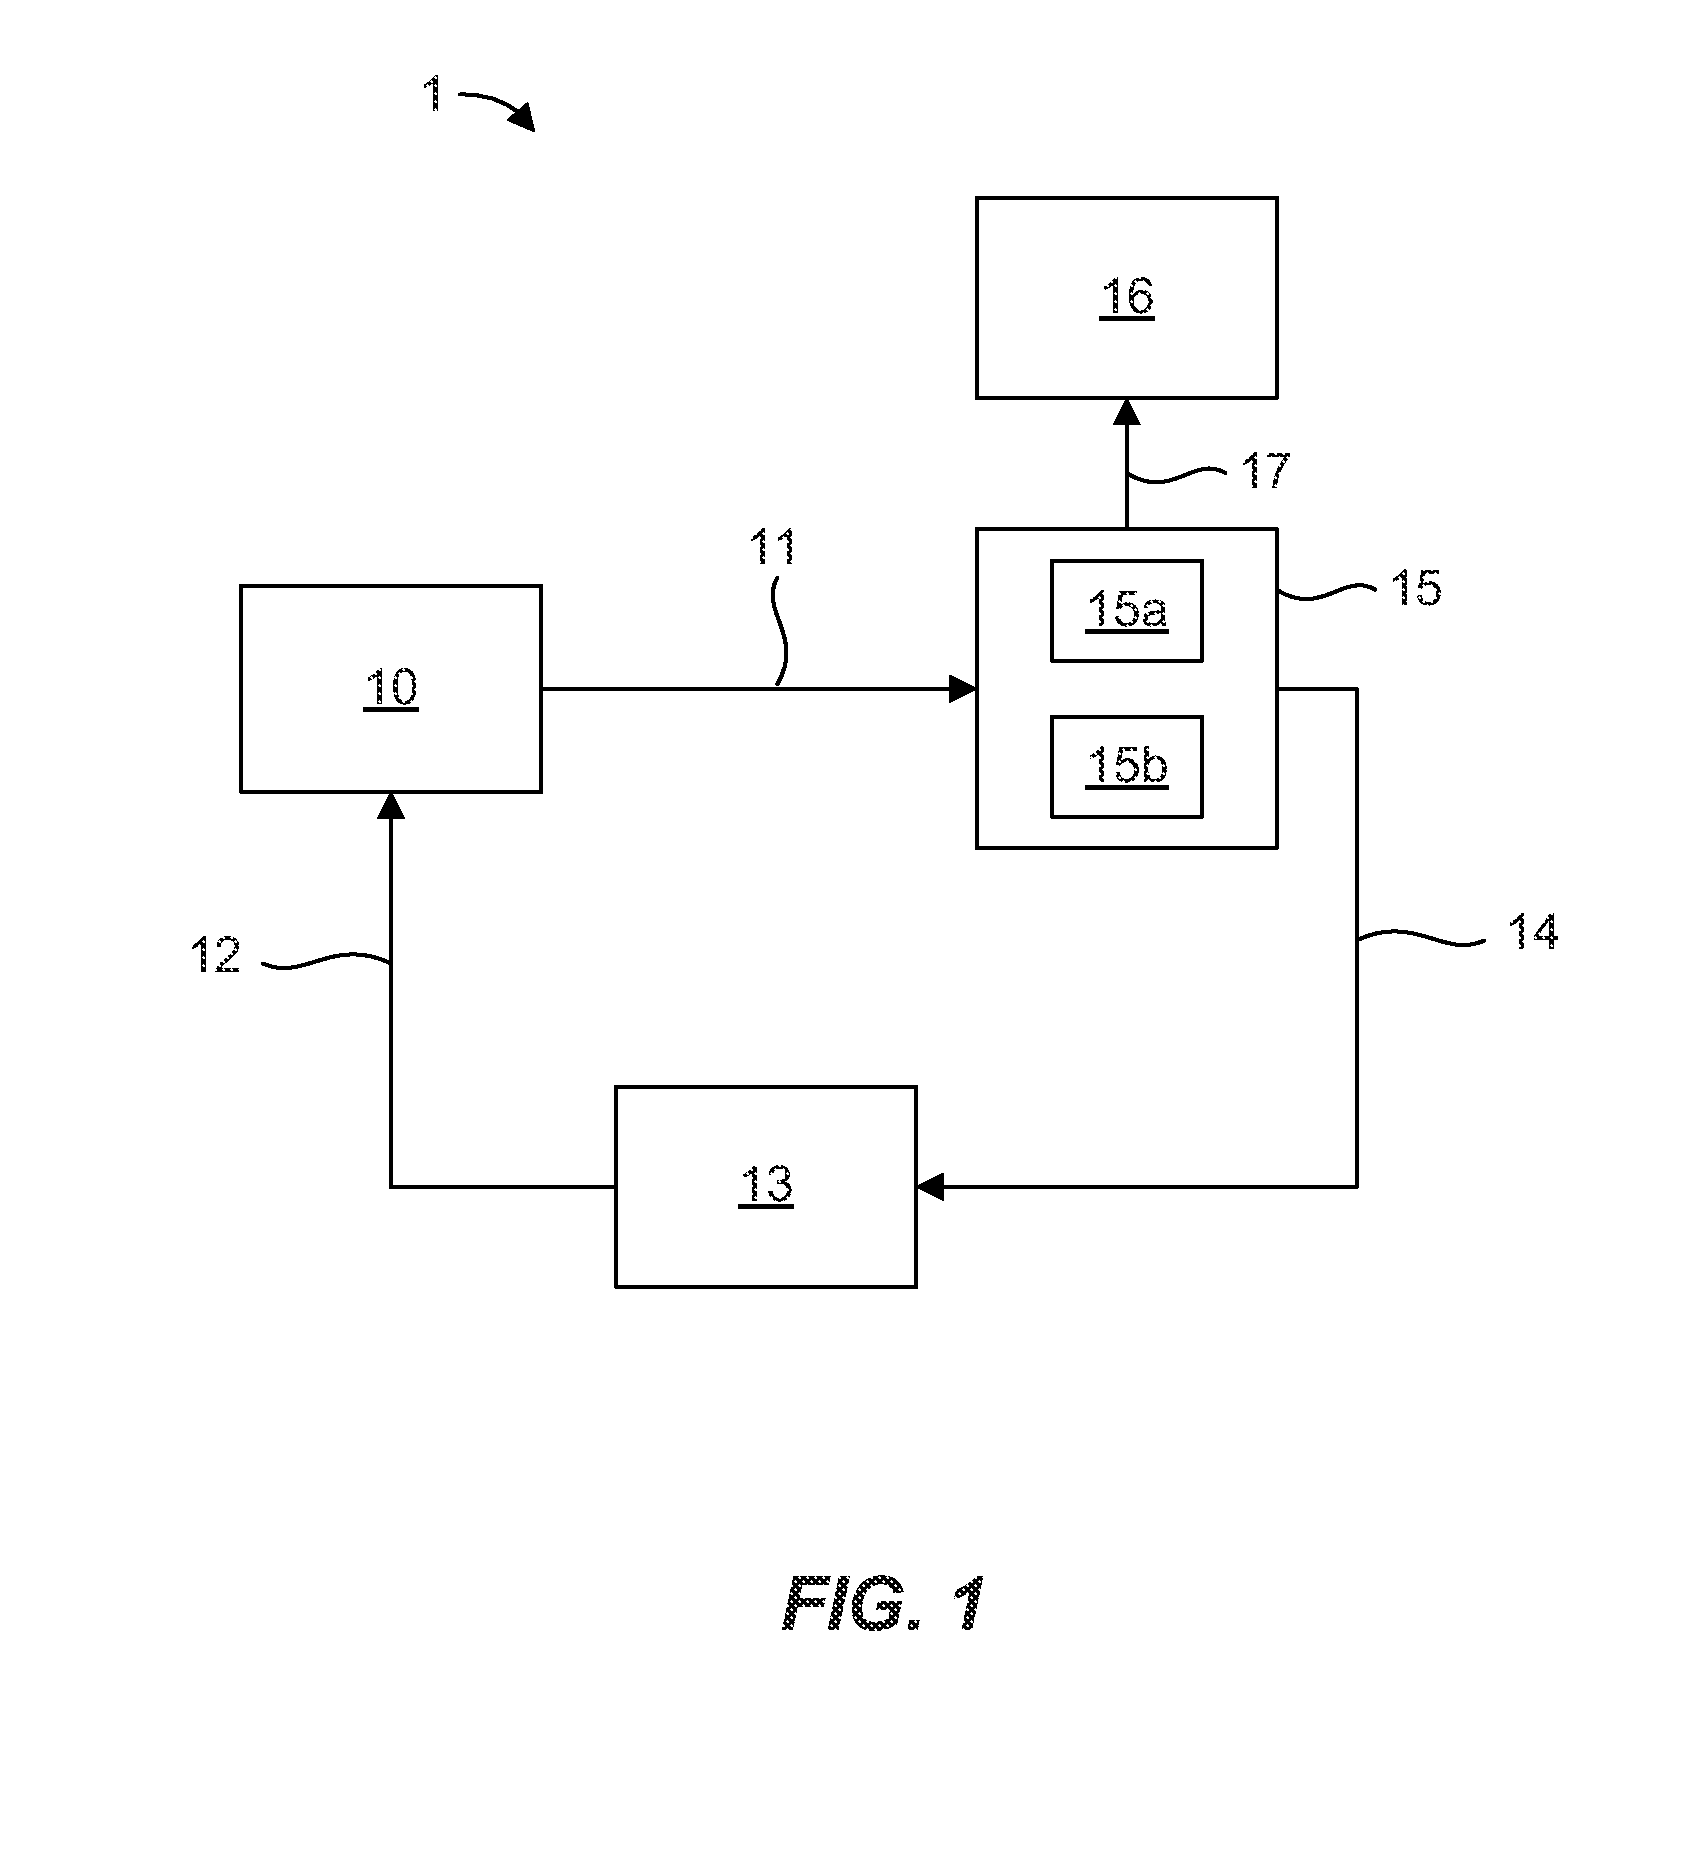 Transient liquid pressure power generation systems and associated devices and methods